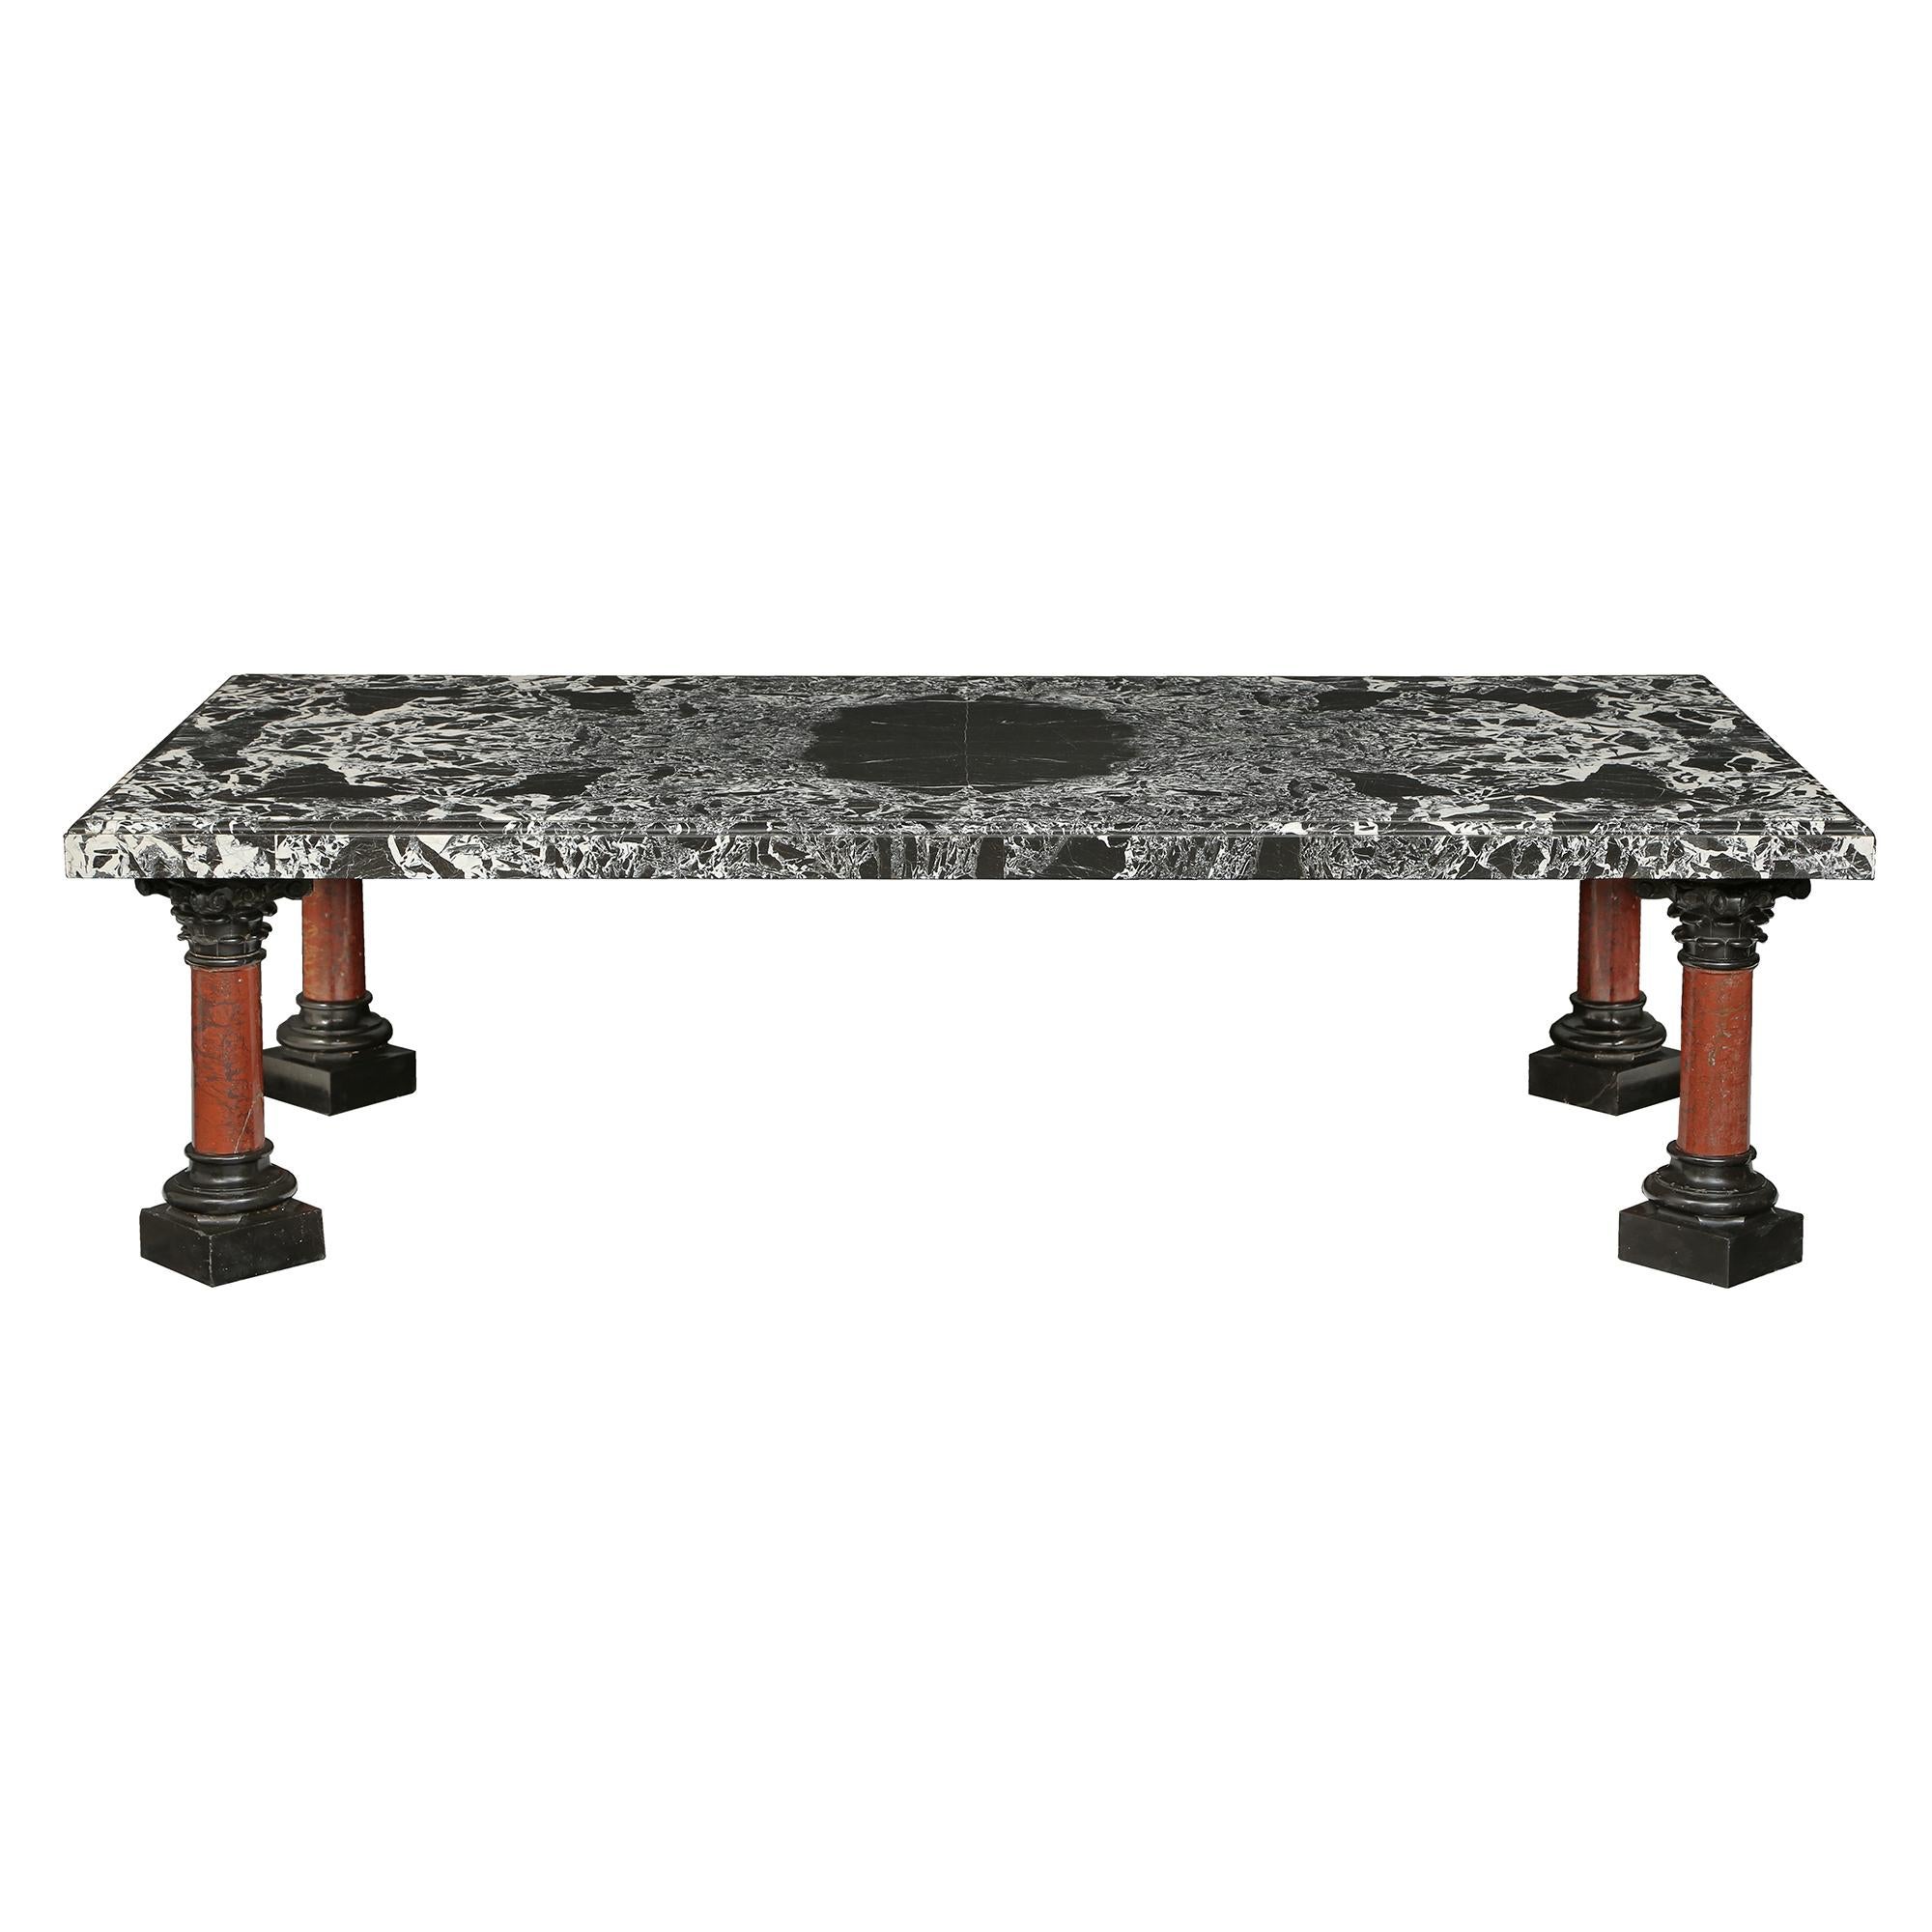 A sensational and large-scale Italian 19th-century marble coffee table. The coffee table is raised by four richly sculpted columns with black Belgian marble plinths and scrolled capitals and a Rouge Griote marble fut. The rectangular Grand Antique